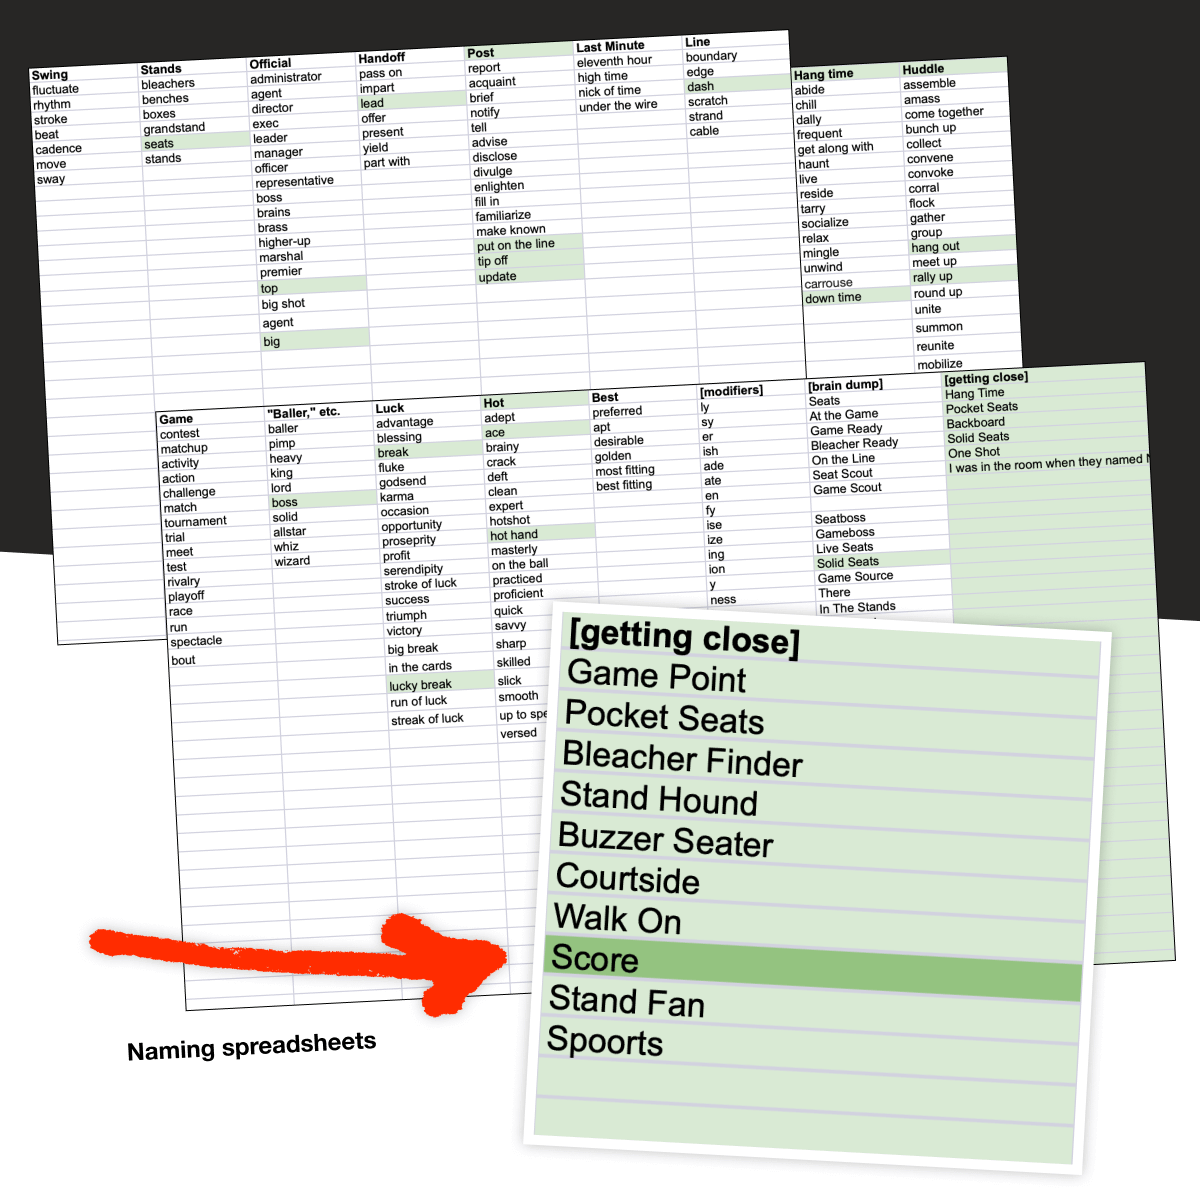 Collage of the different spreadsheets used to brainstorm names for the product with arrow pointing to ‘Score’